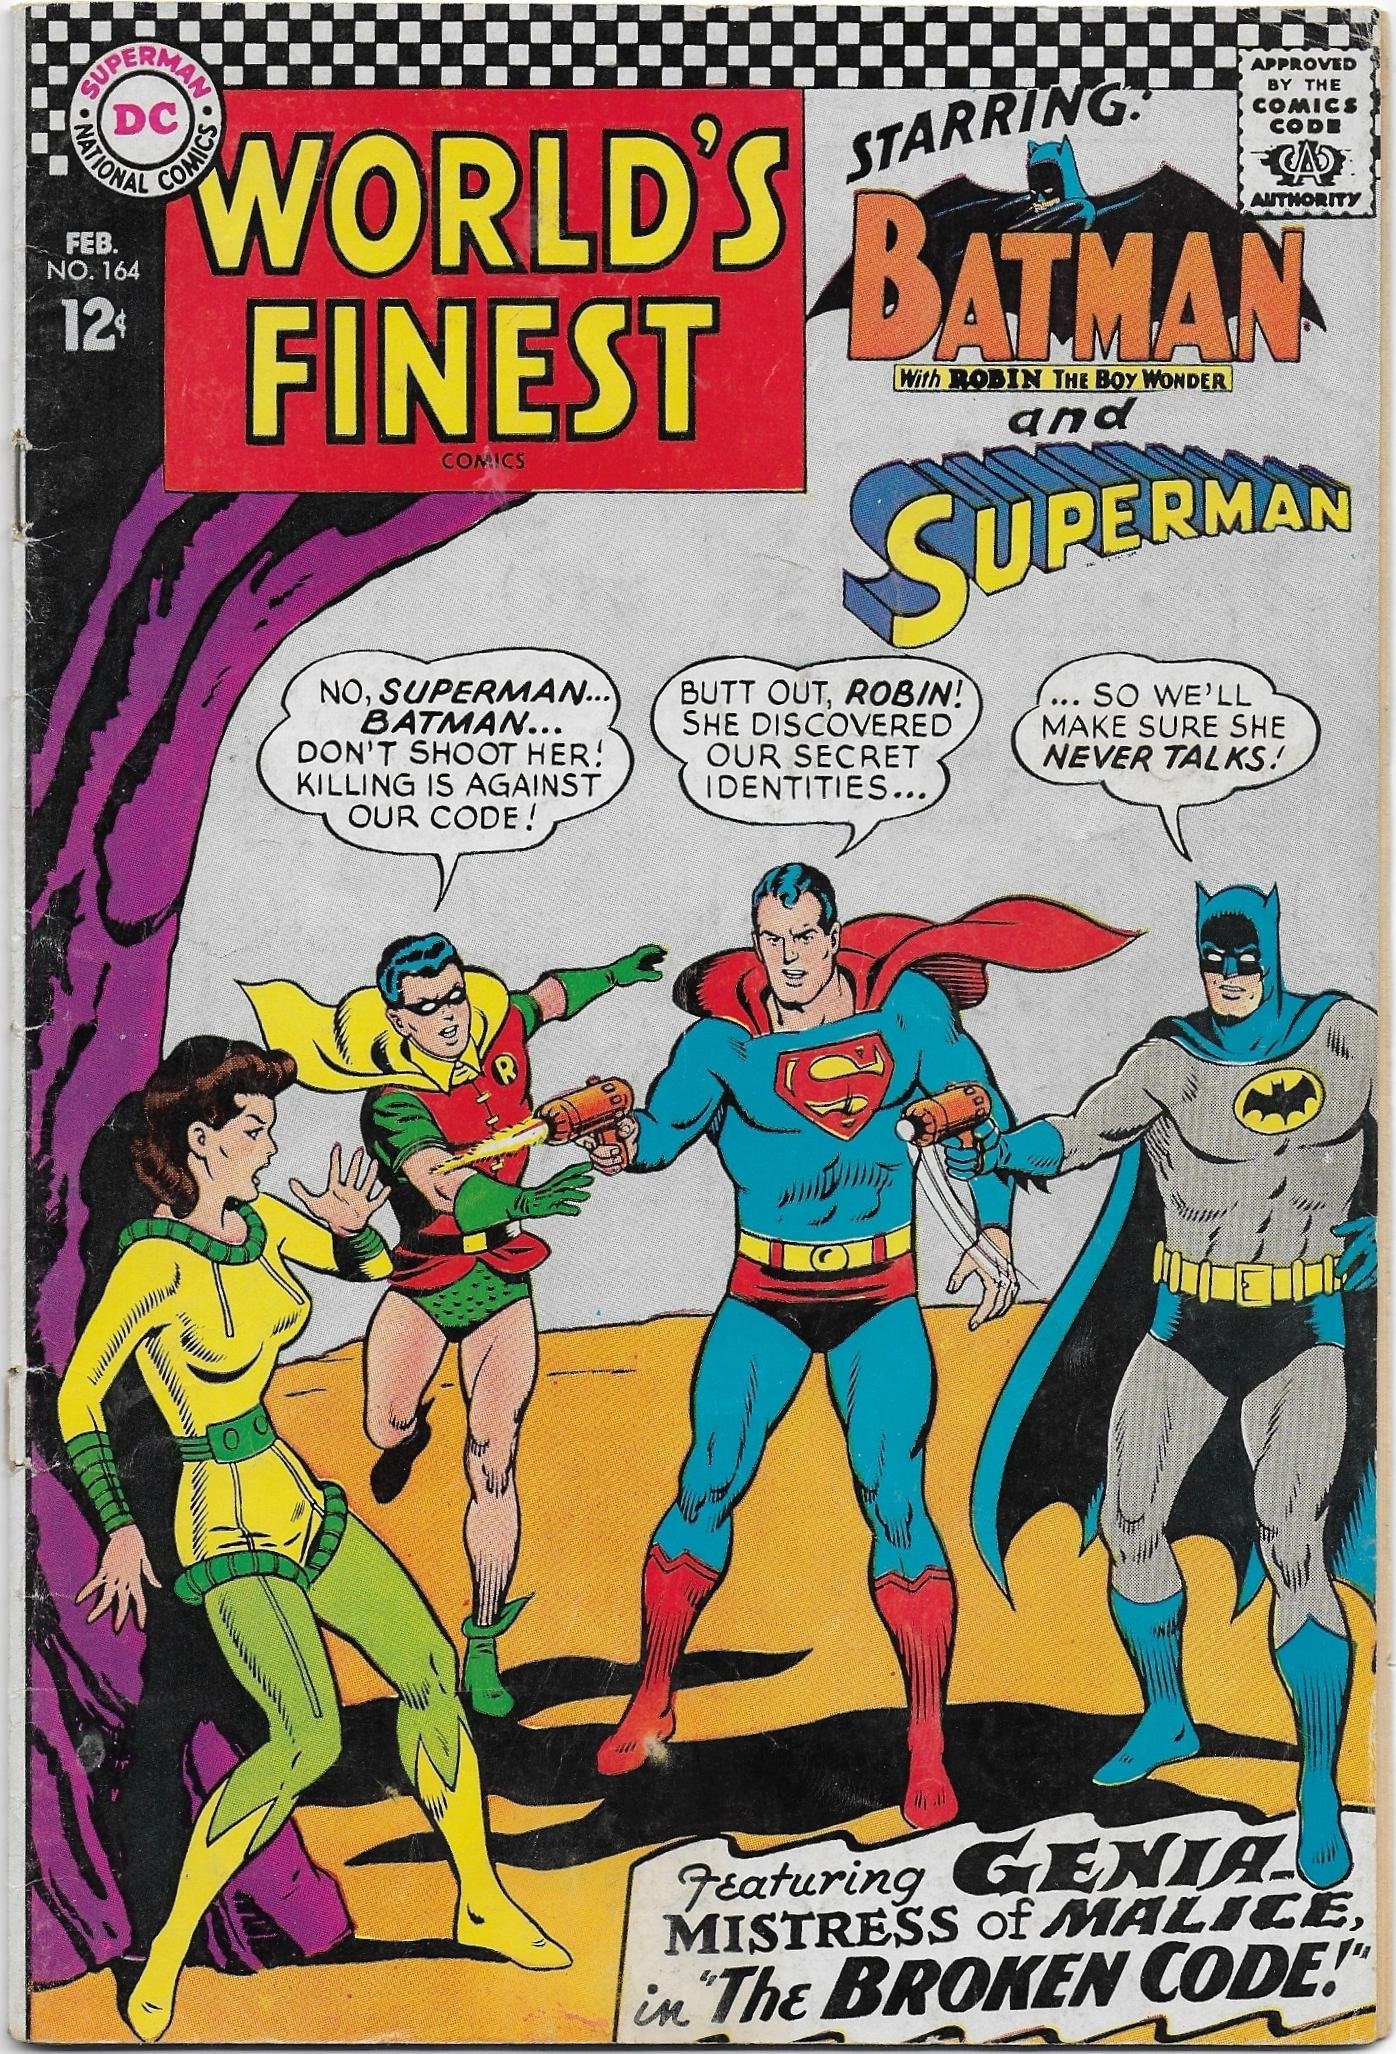 World's Finest 164 Silver Age Superman and Batman Comic - Etsy